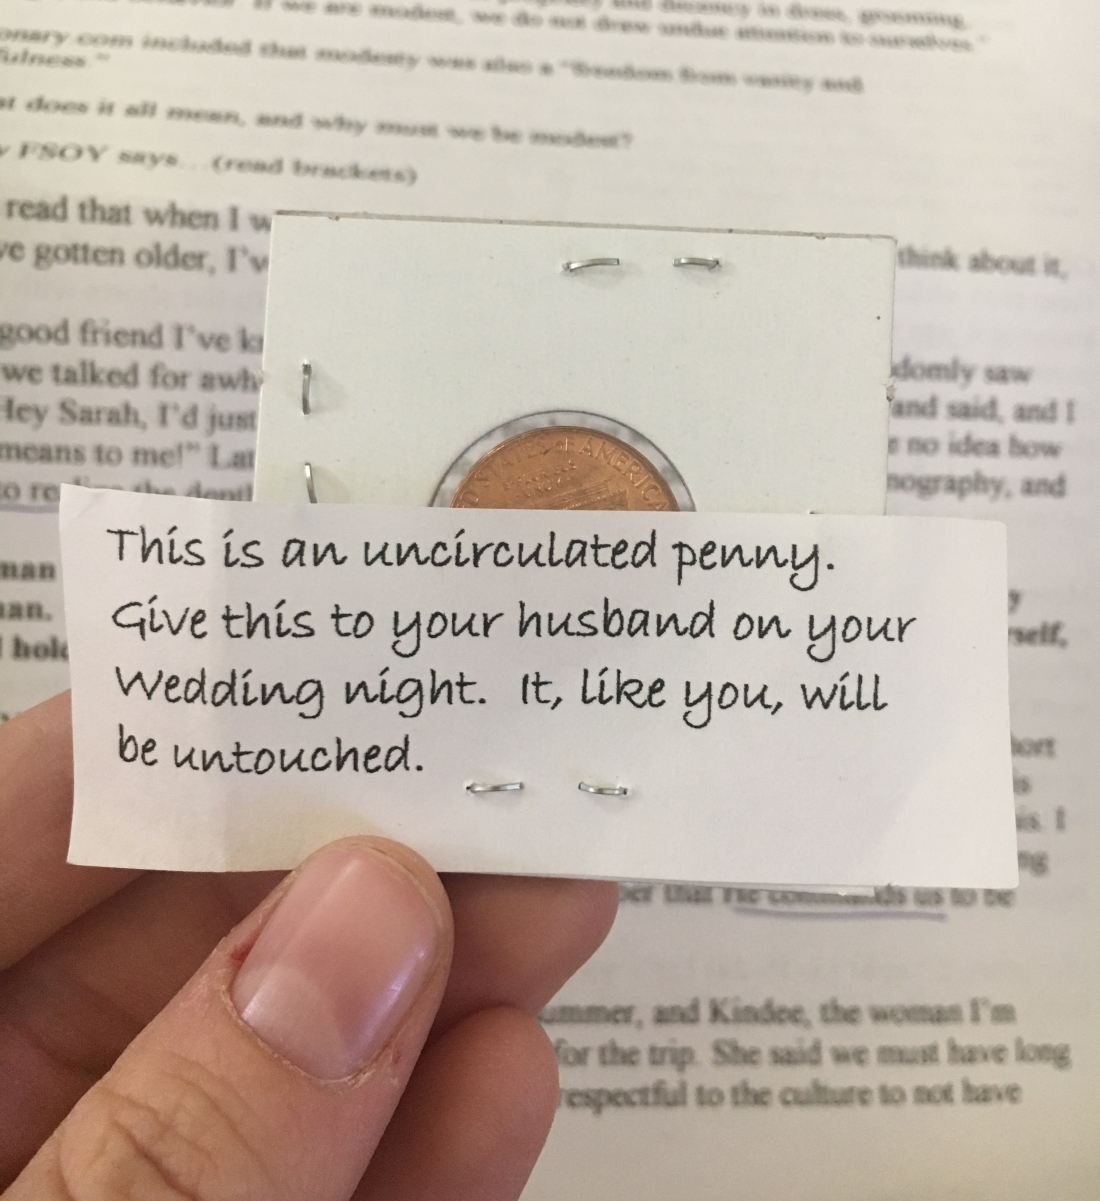 Photo of new penny in case with a slip of paper stapled to it. The slip of paper reads, "This is an uncirculated penny. Give this to your husband on your wedding night. It, like you, will be untouched."